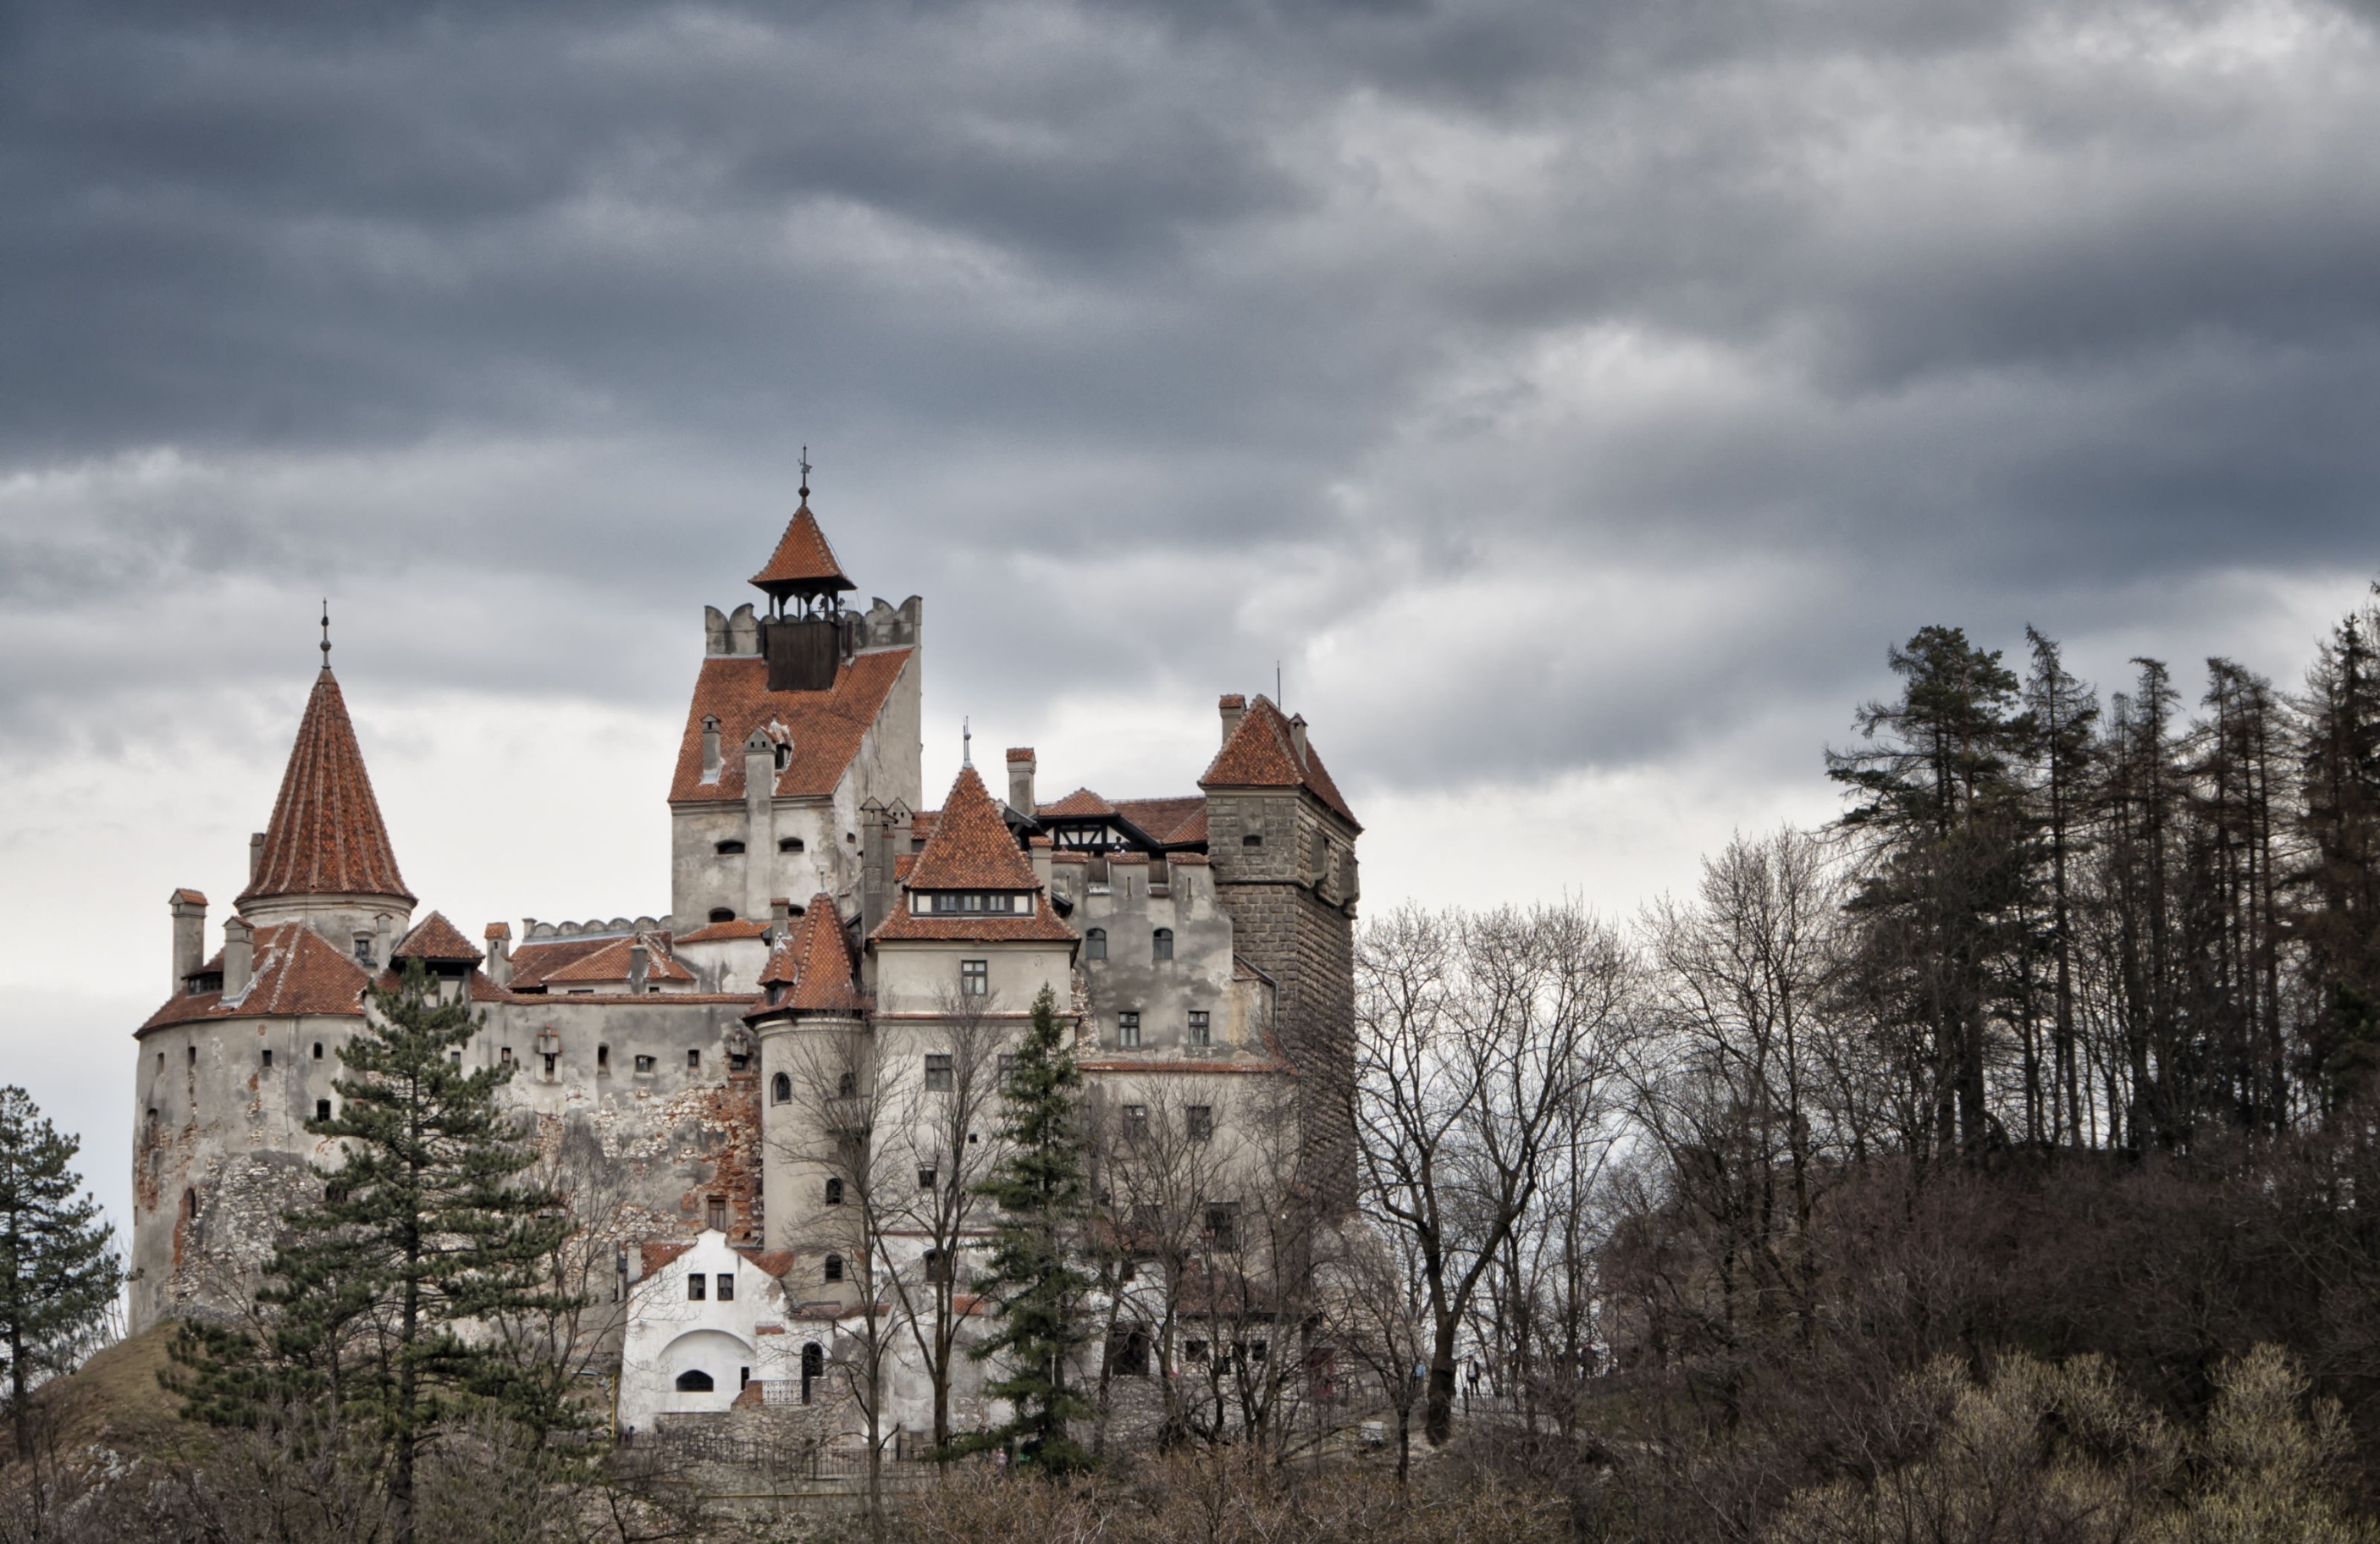 Would You Pay $66 Million For Count Dracula's Castle?